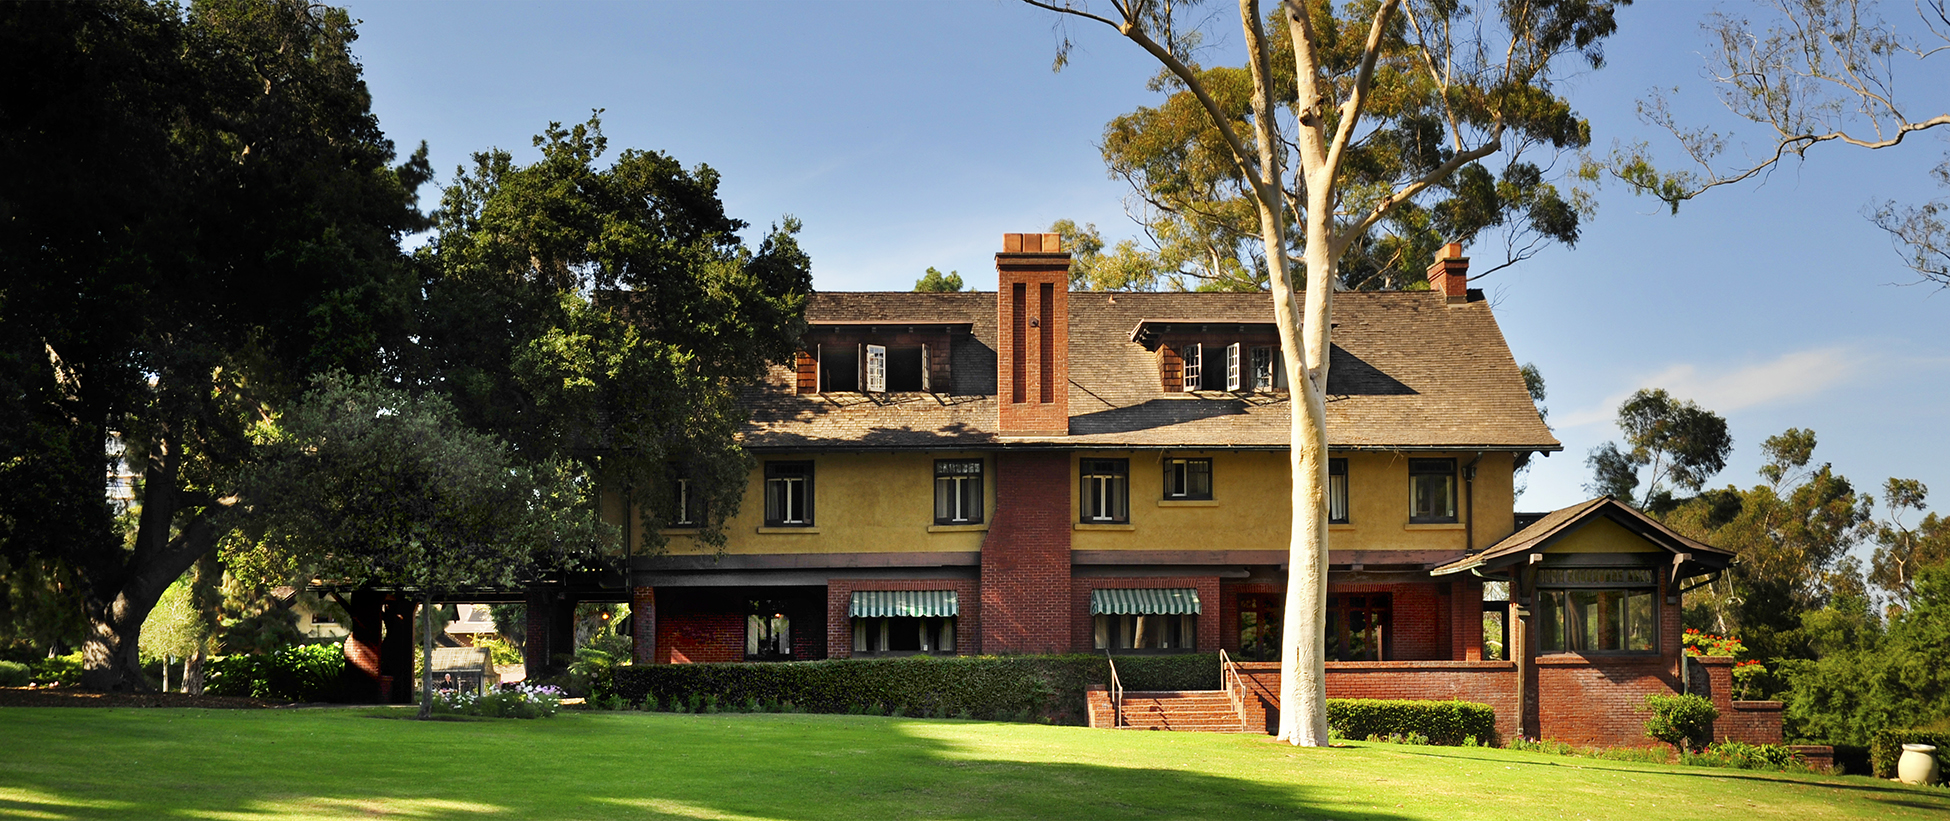 The Marston House building from the outside. The building is red and yellow with a brown roof.